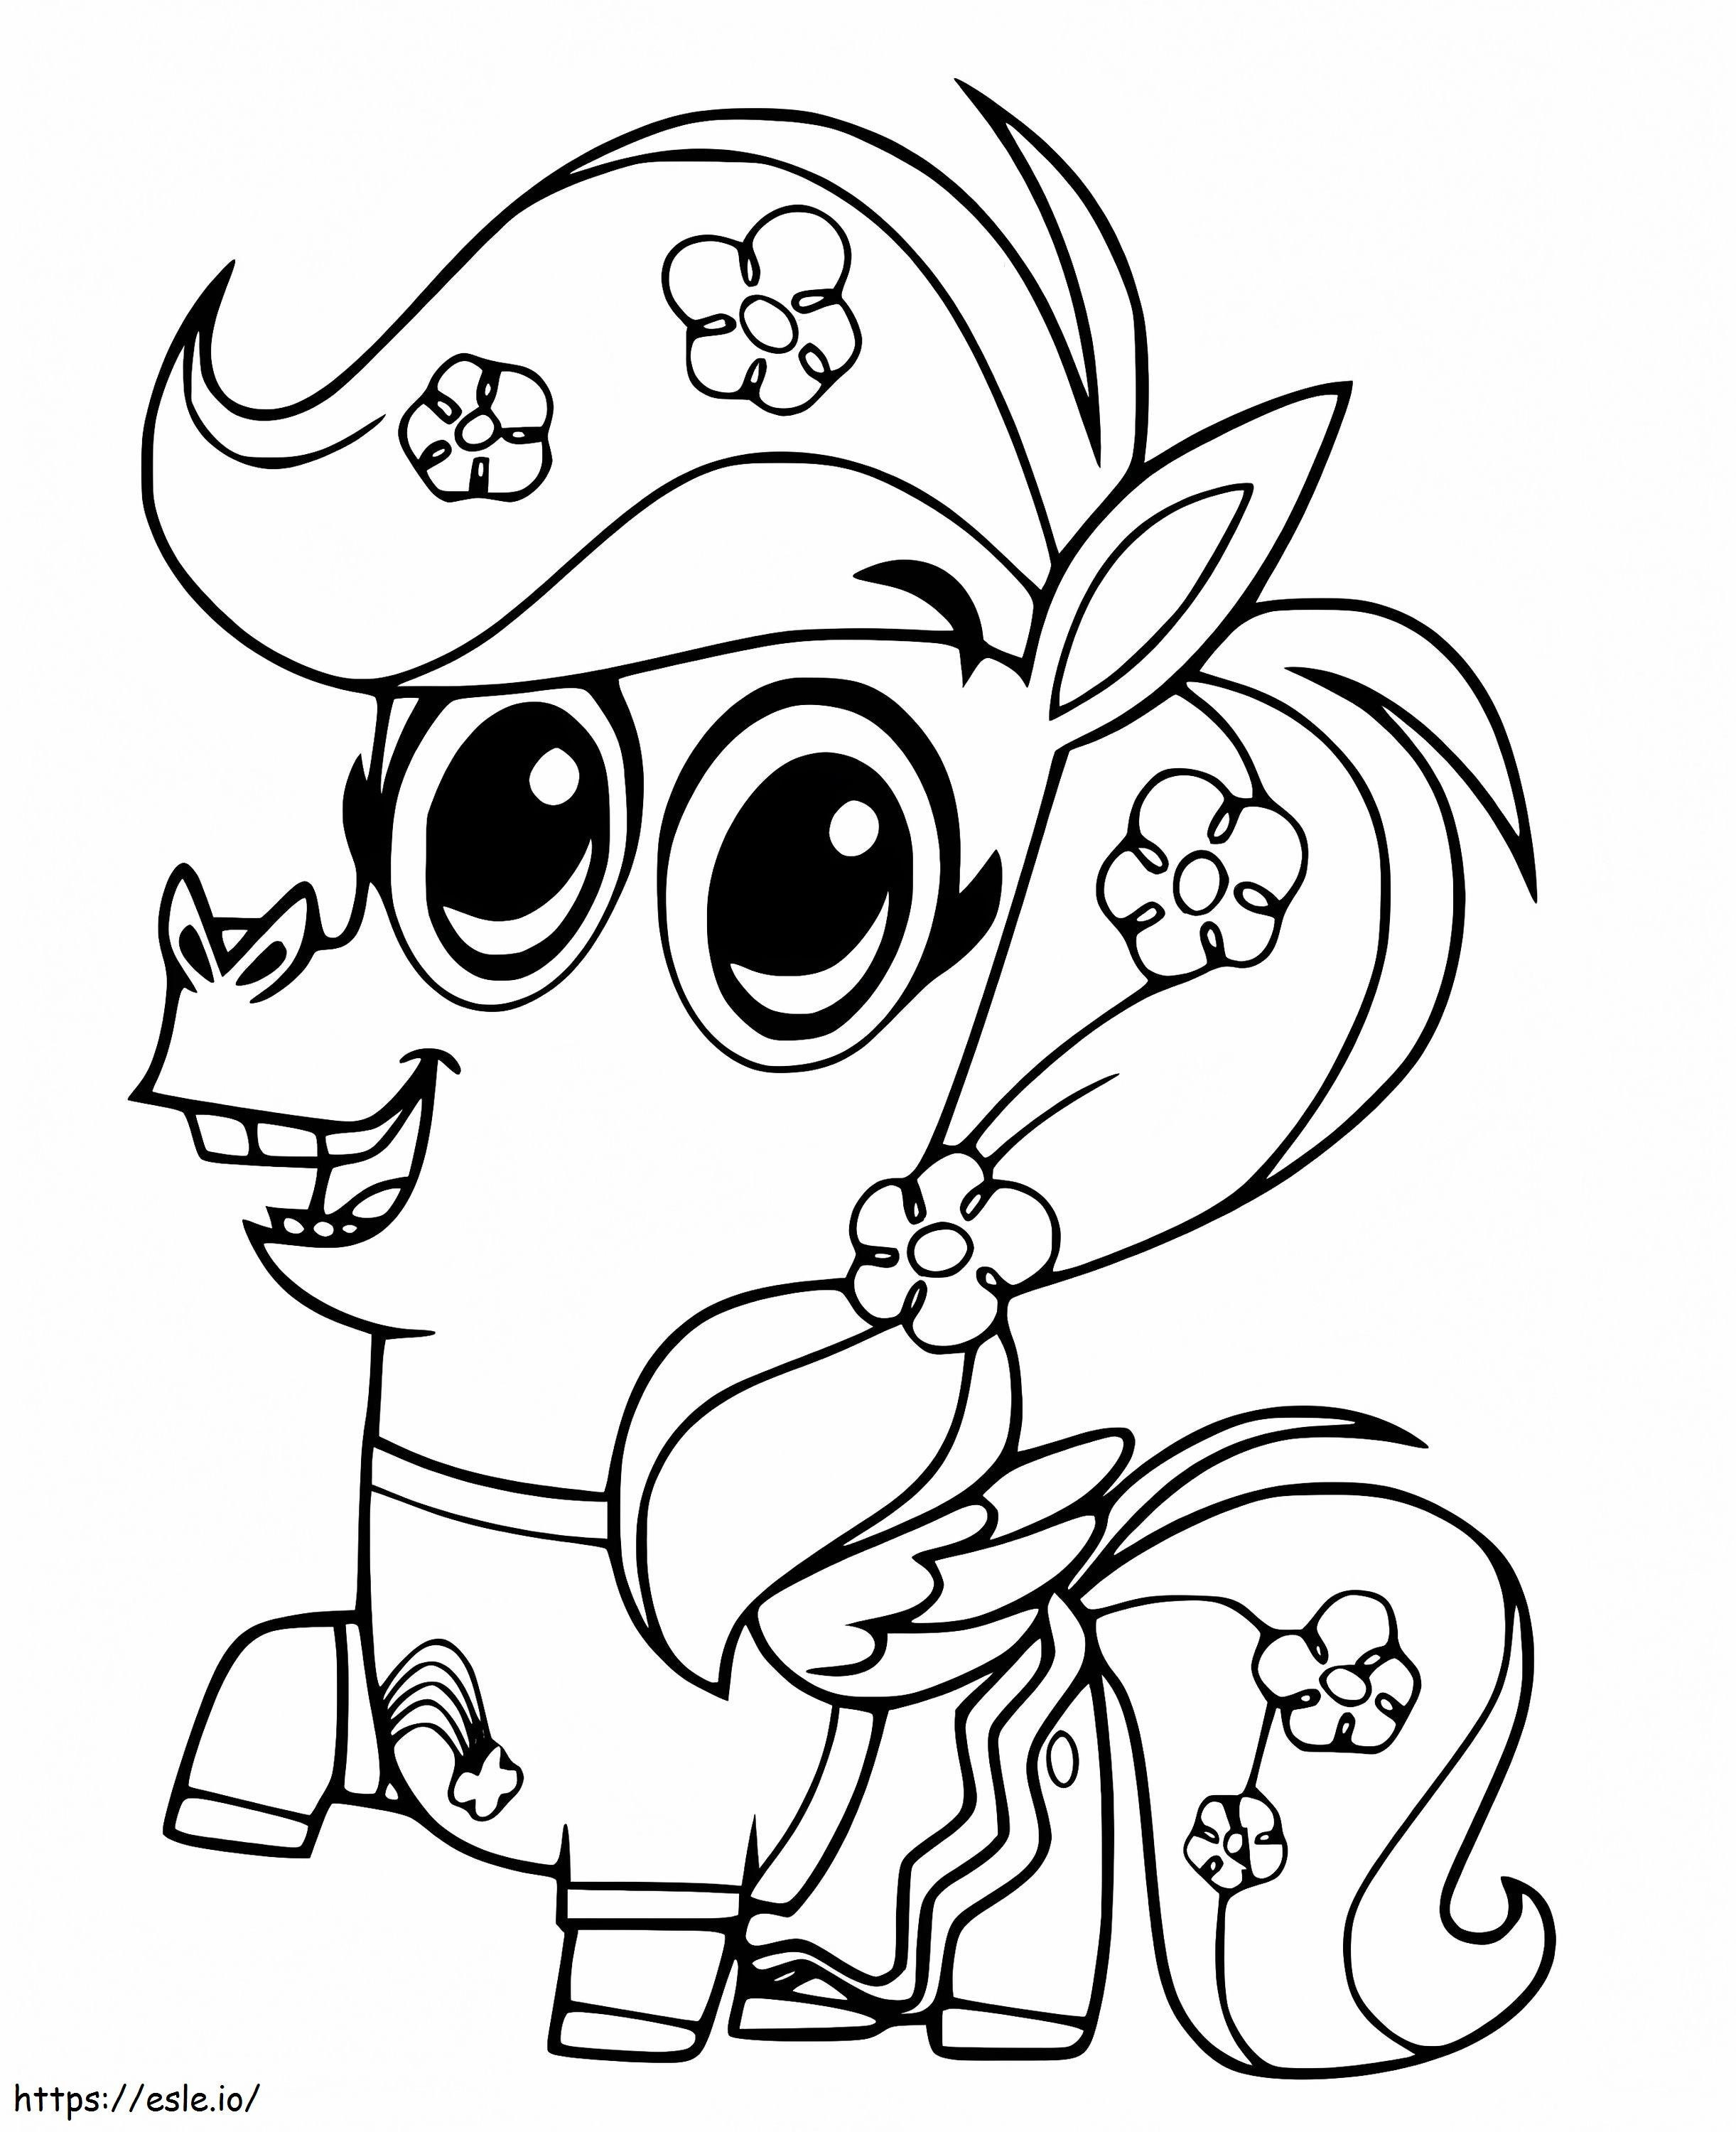 Cute Peg From Corn And Peg coloring page